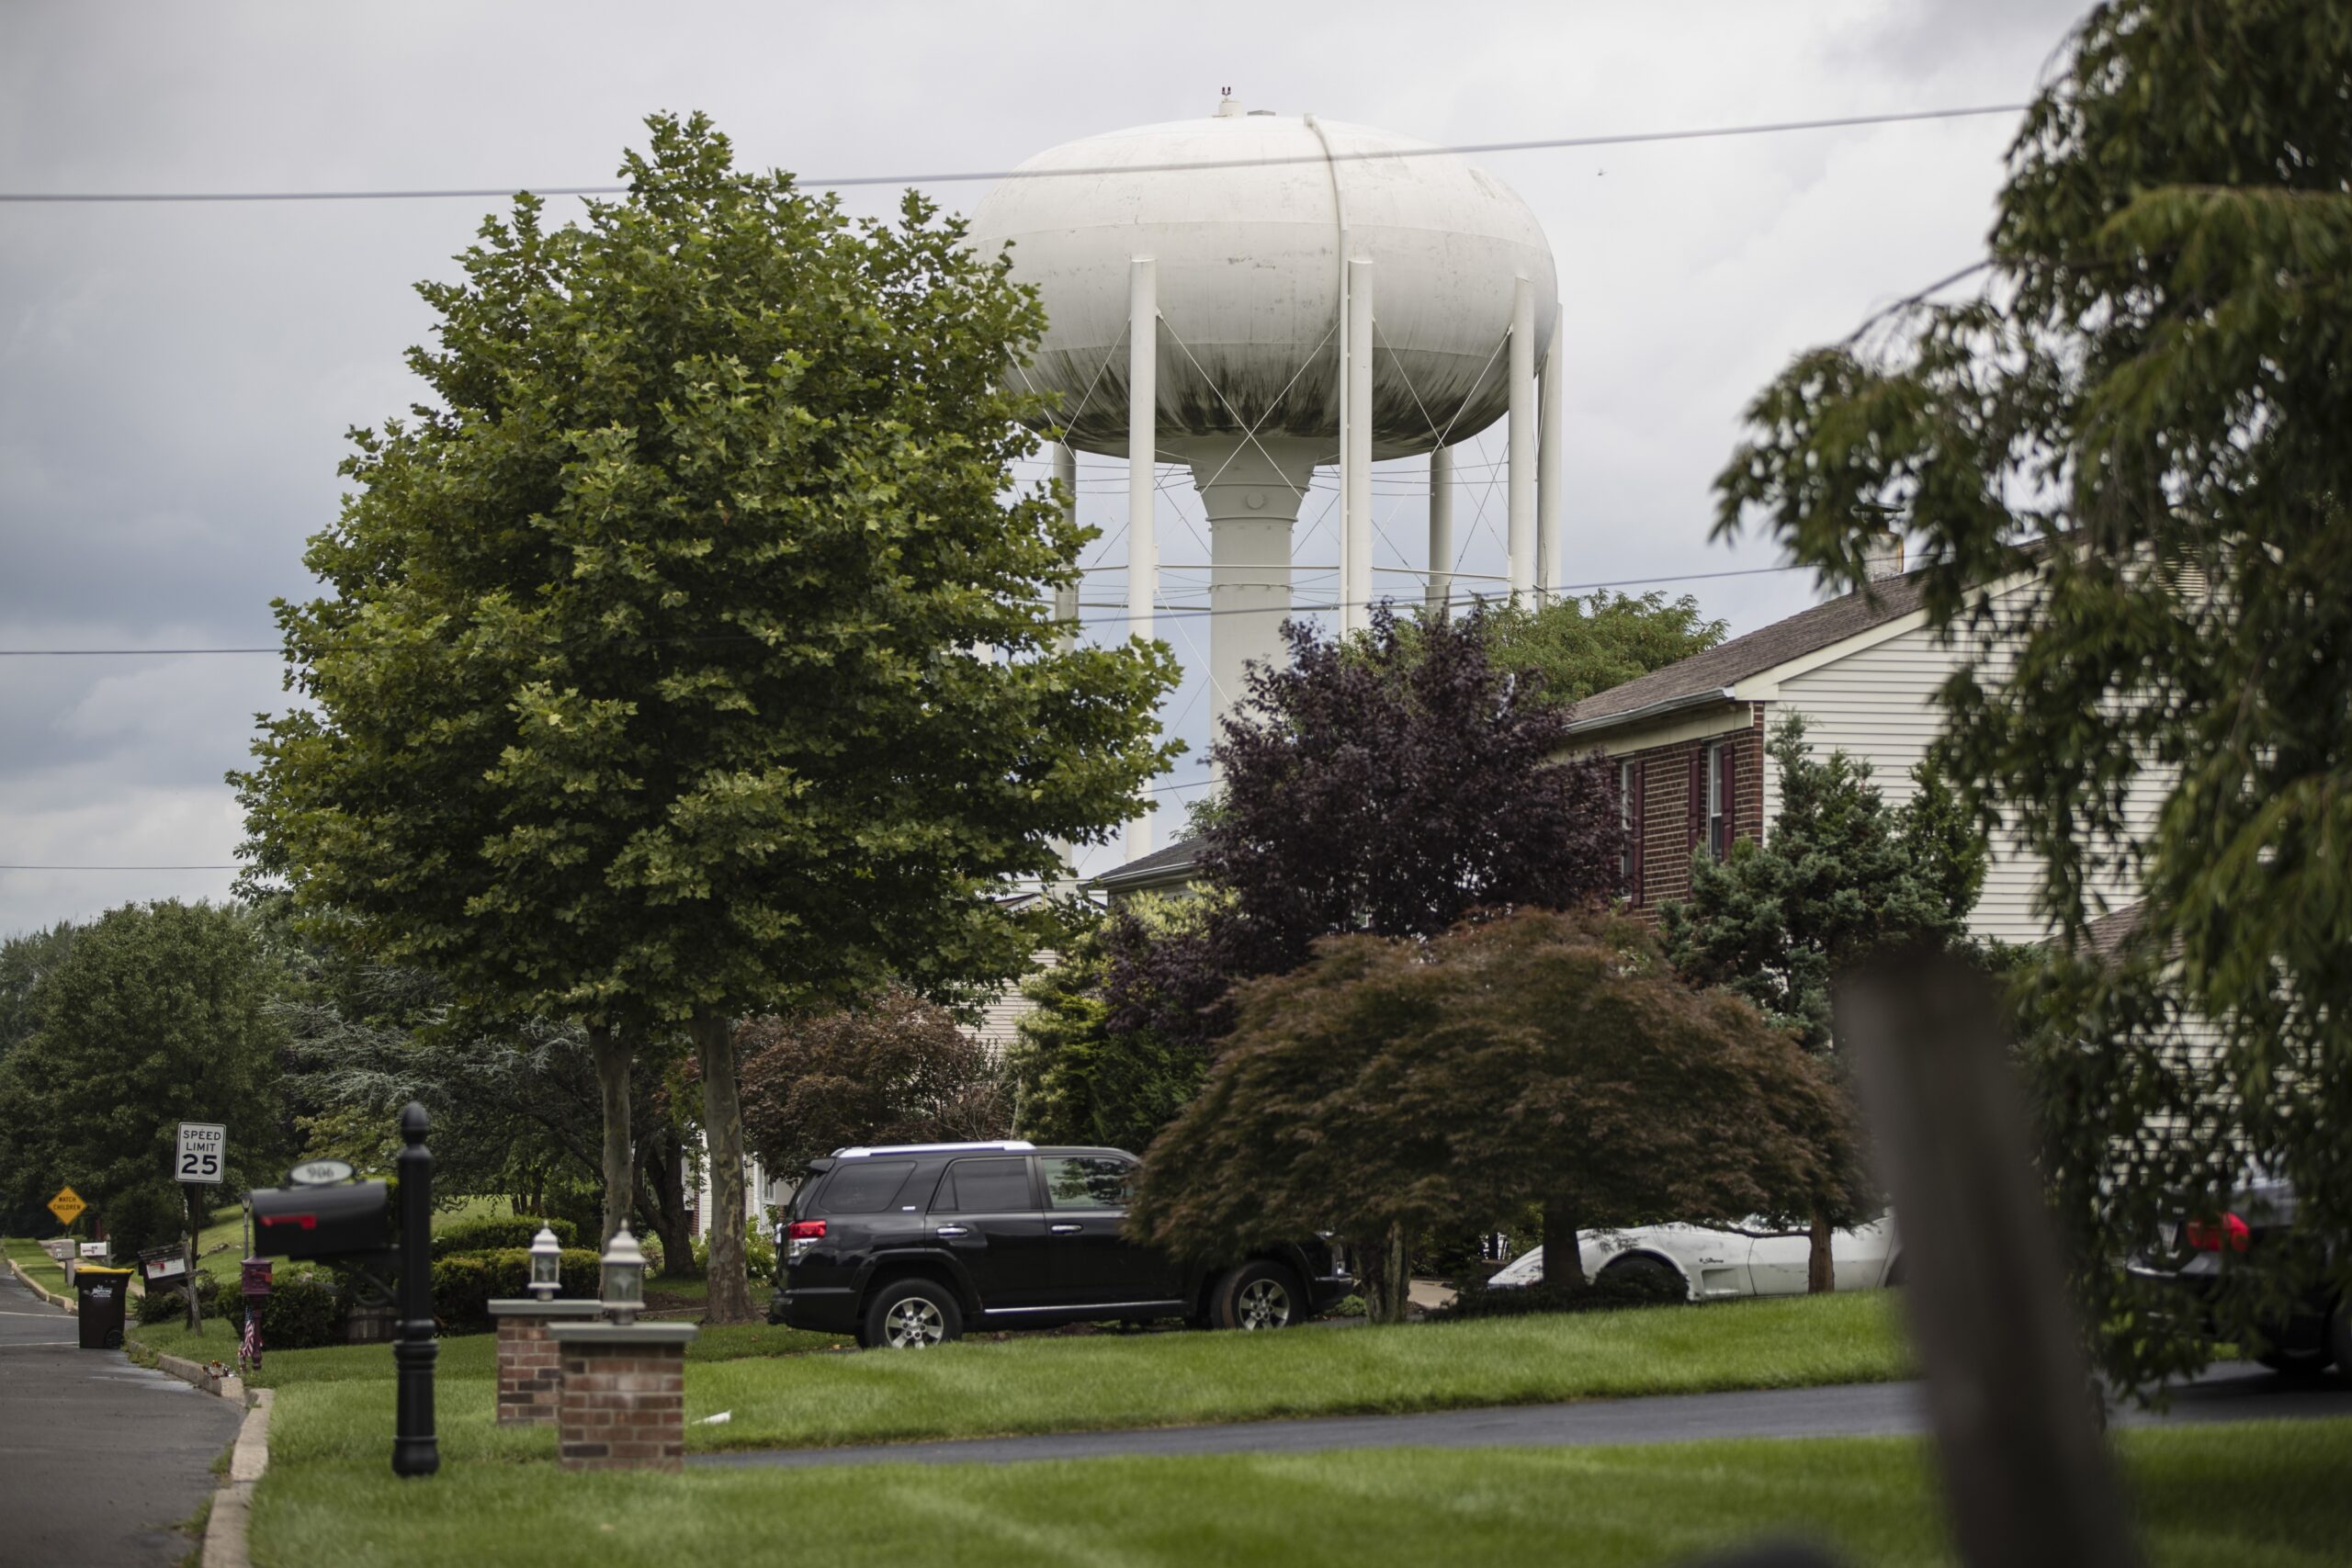 a water tower stands above a residential neighborhood